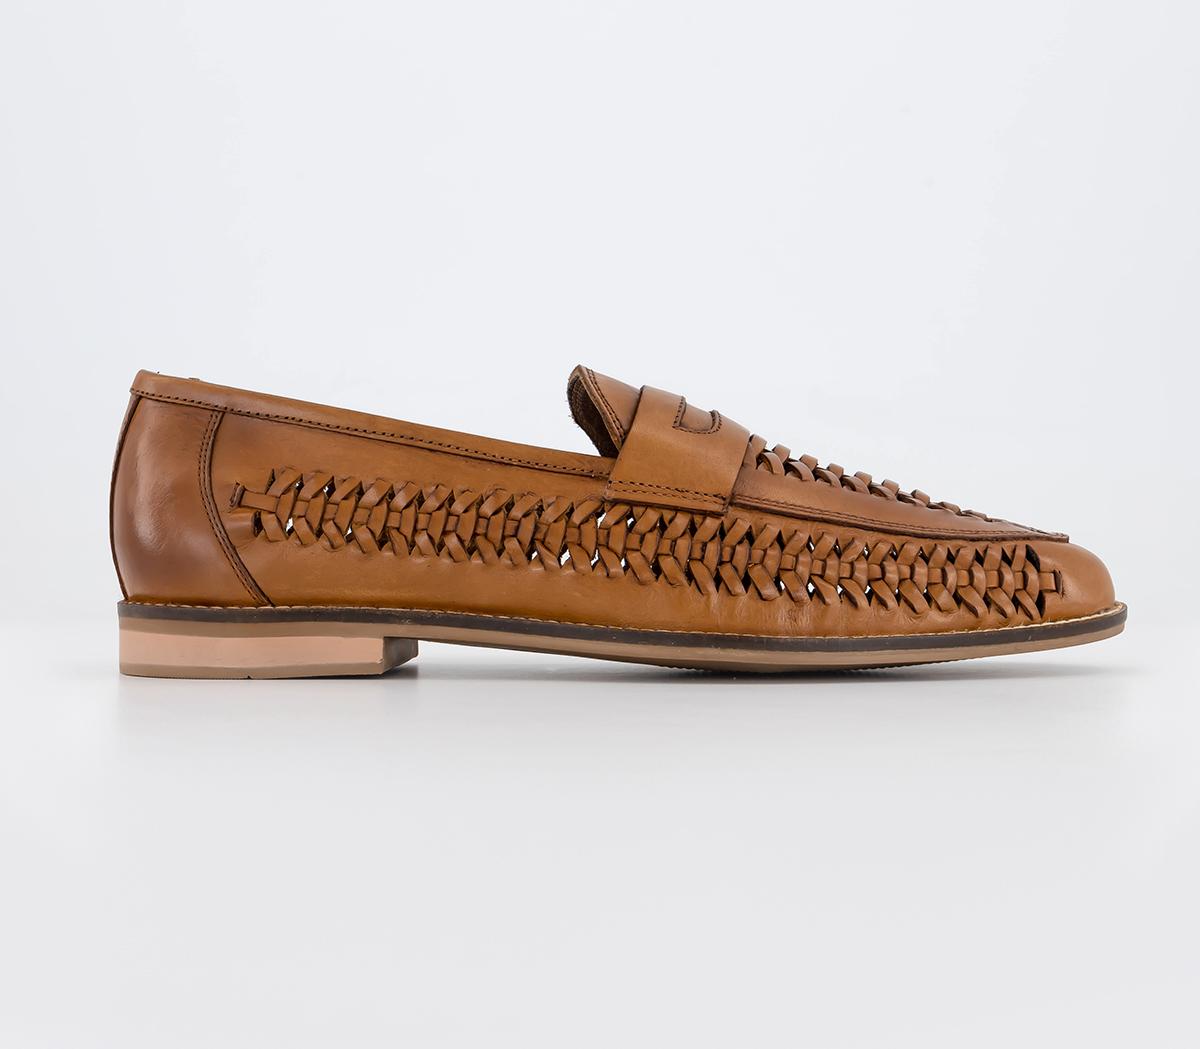 OFFICEChiswick - 2 Woven Saddle ShoesTan Leather